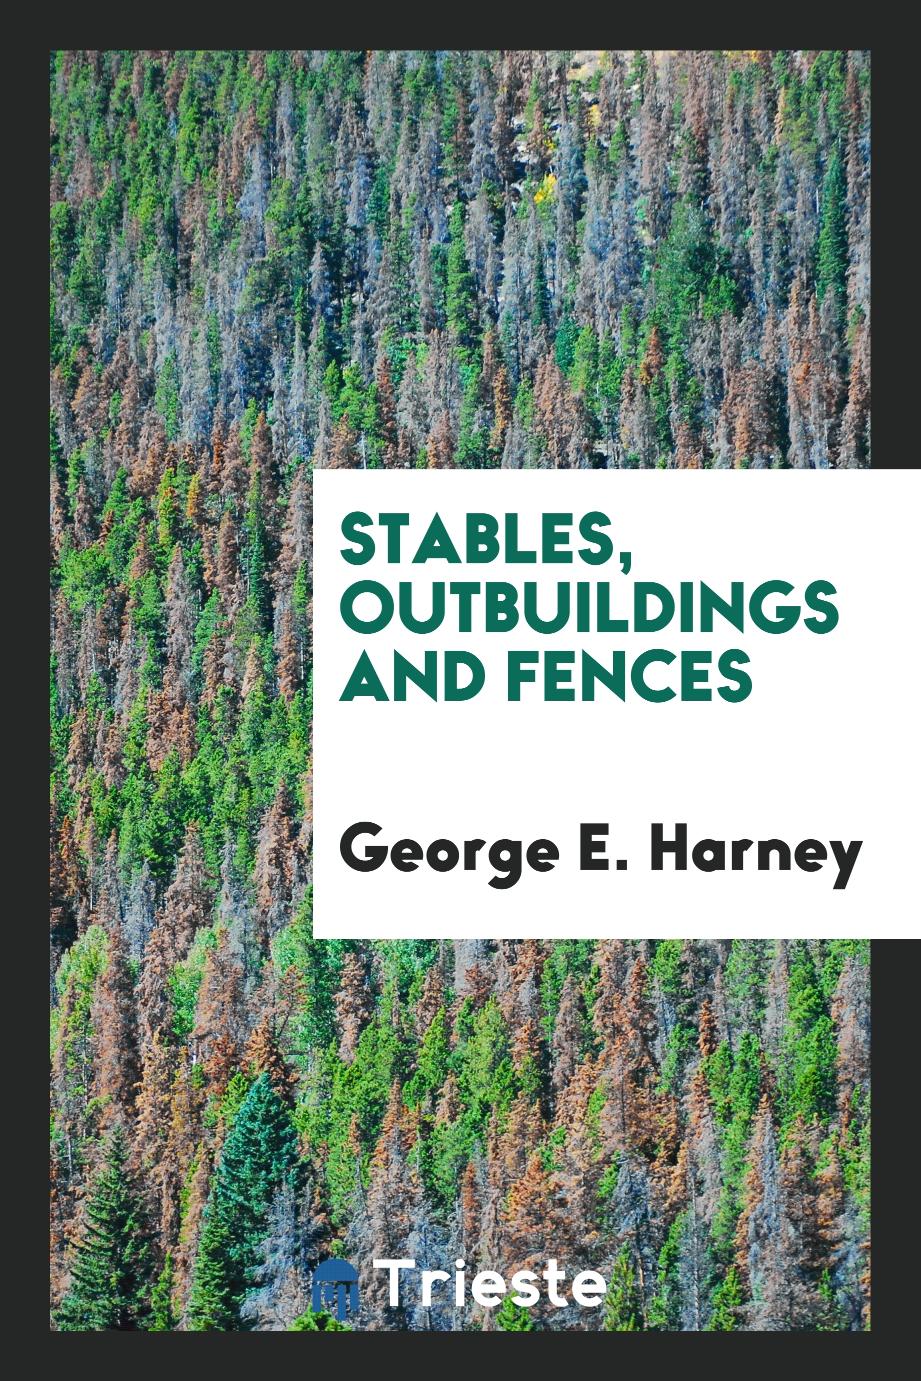 Stables, outbuildings and fences